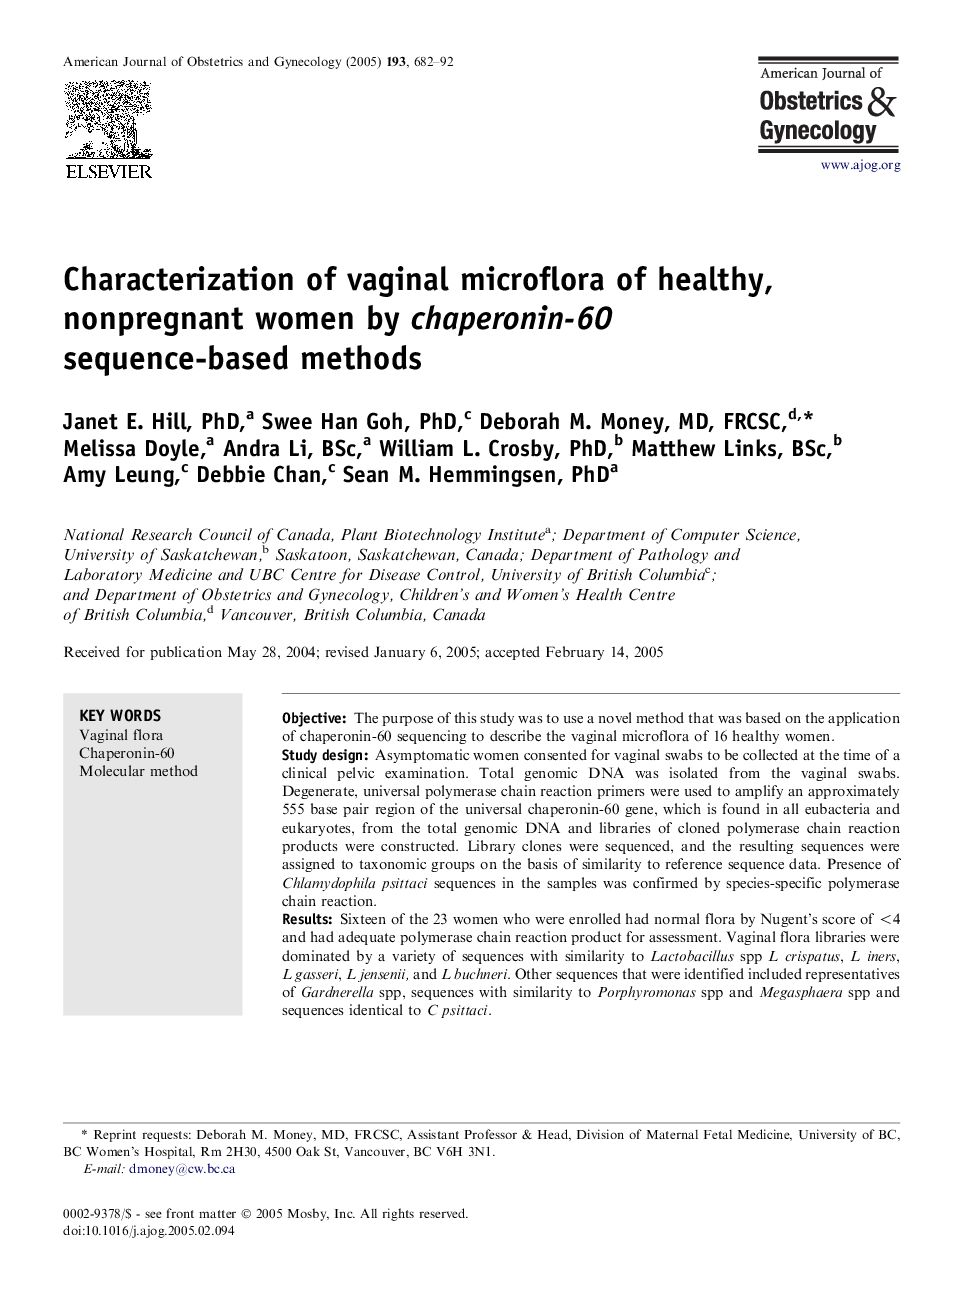 Characterization of vaginal microflora of healthy, nonpregnant women by chaperonin-60 sequence-based methods